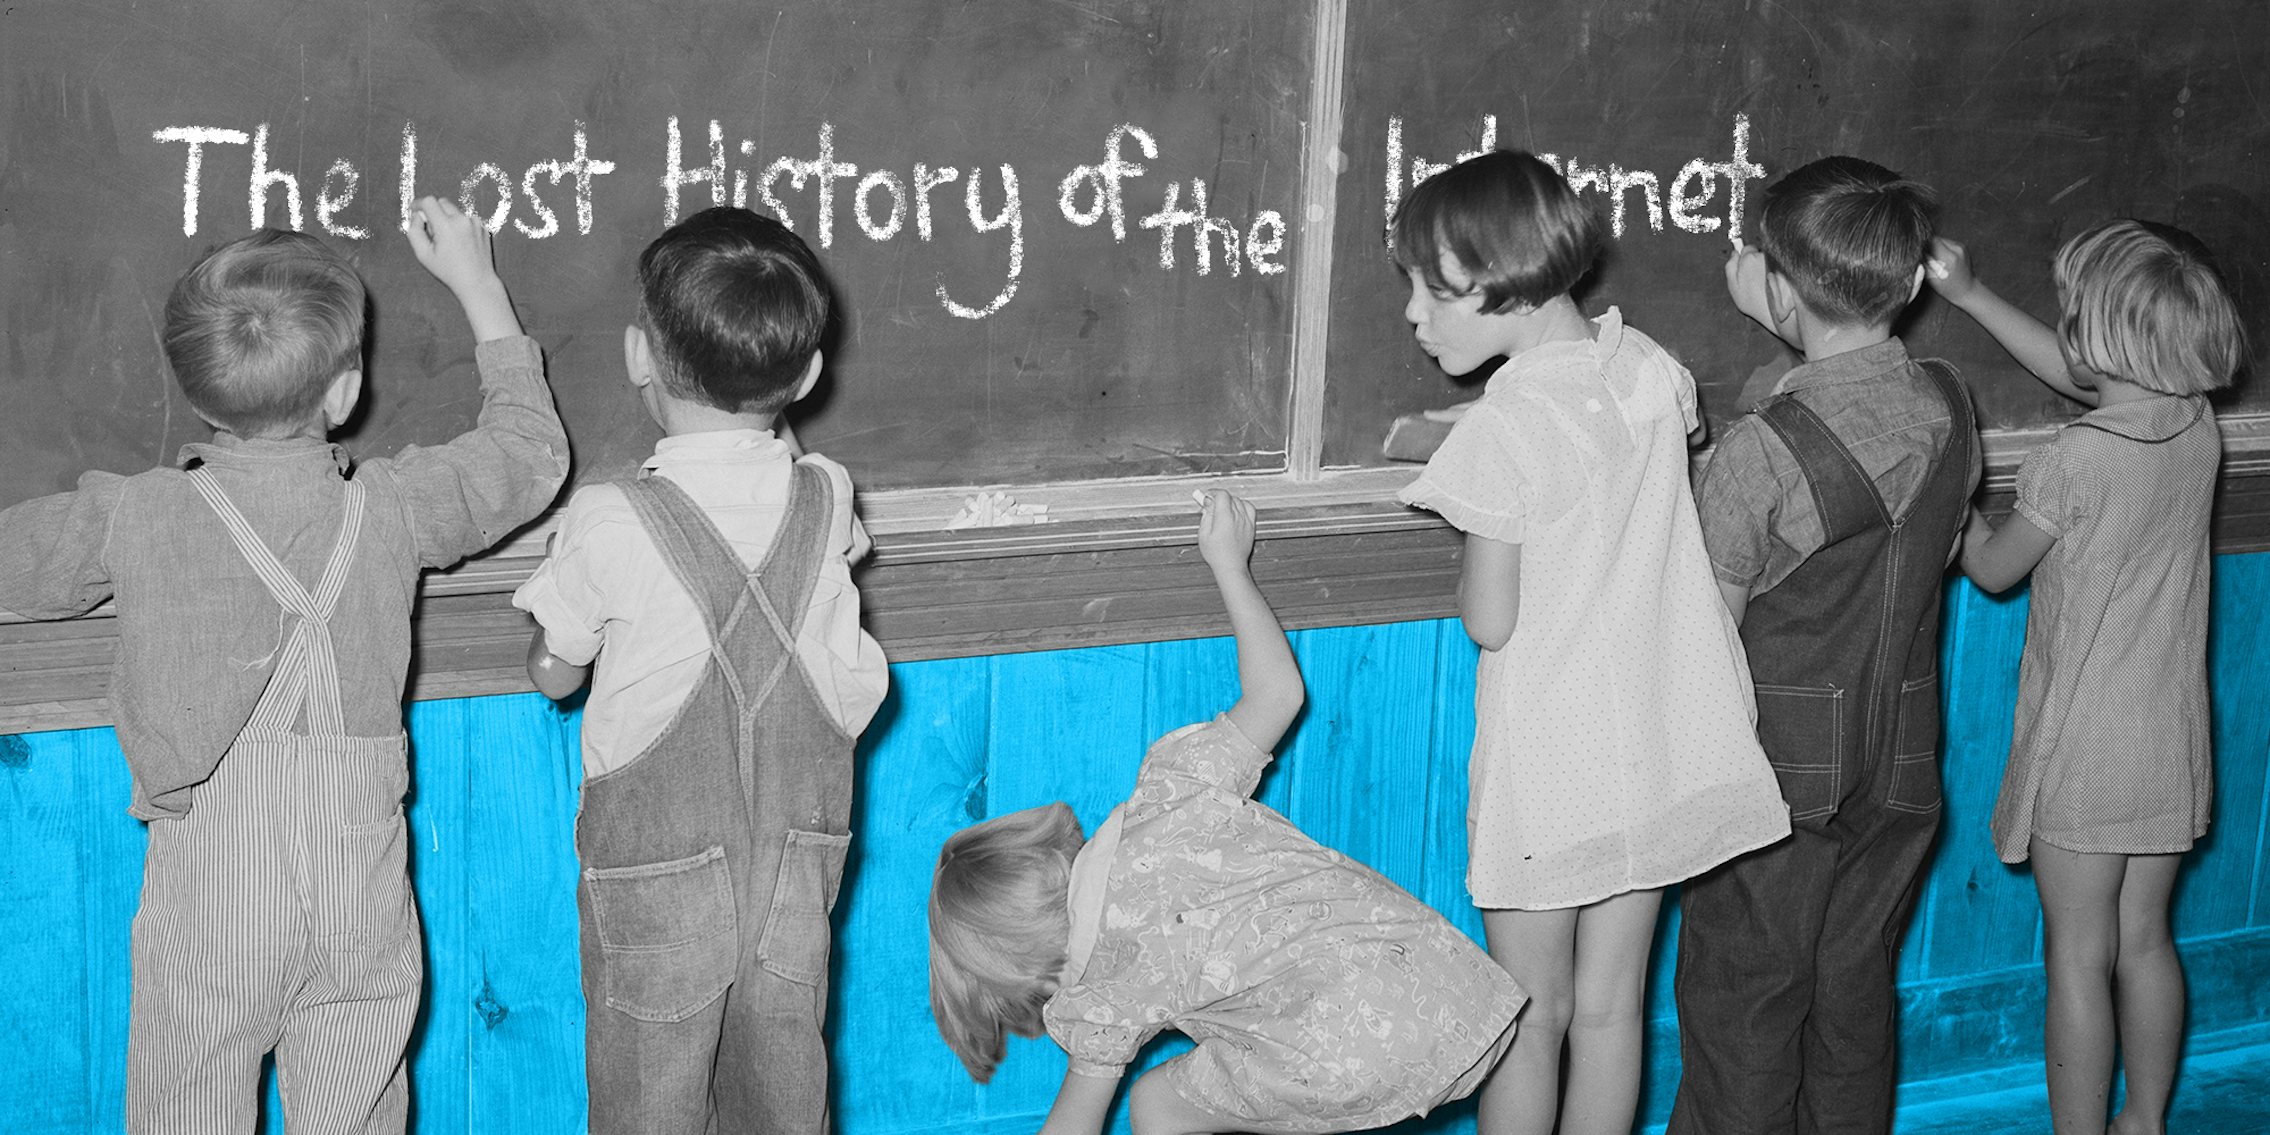 Children writing 'The Lost History of the Internet' on a chalkboard